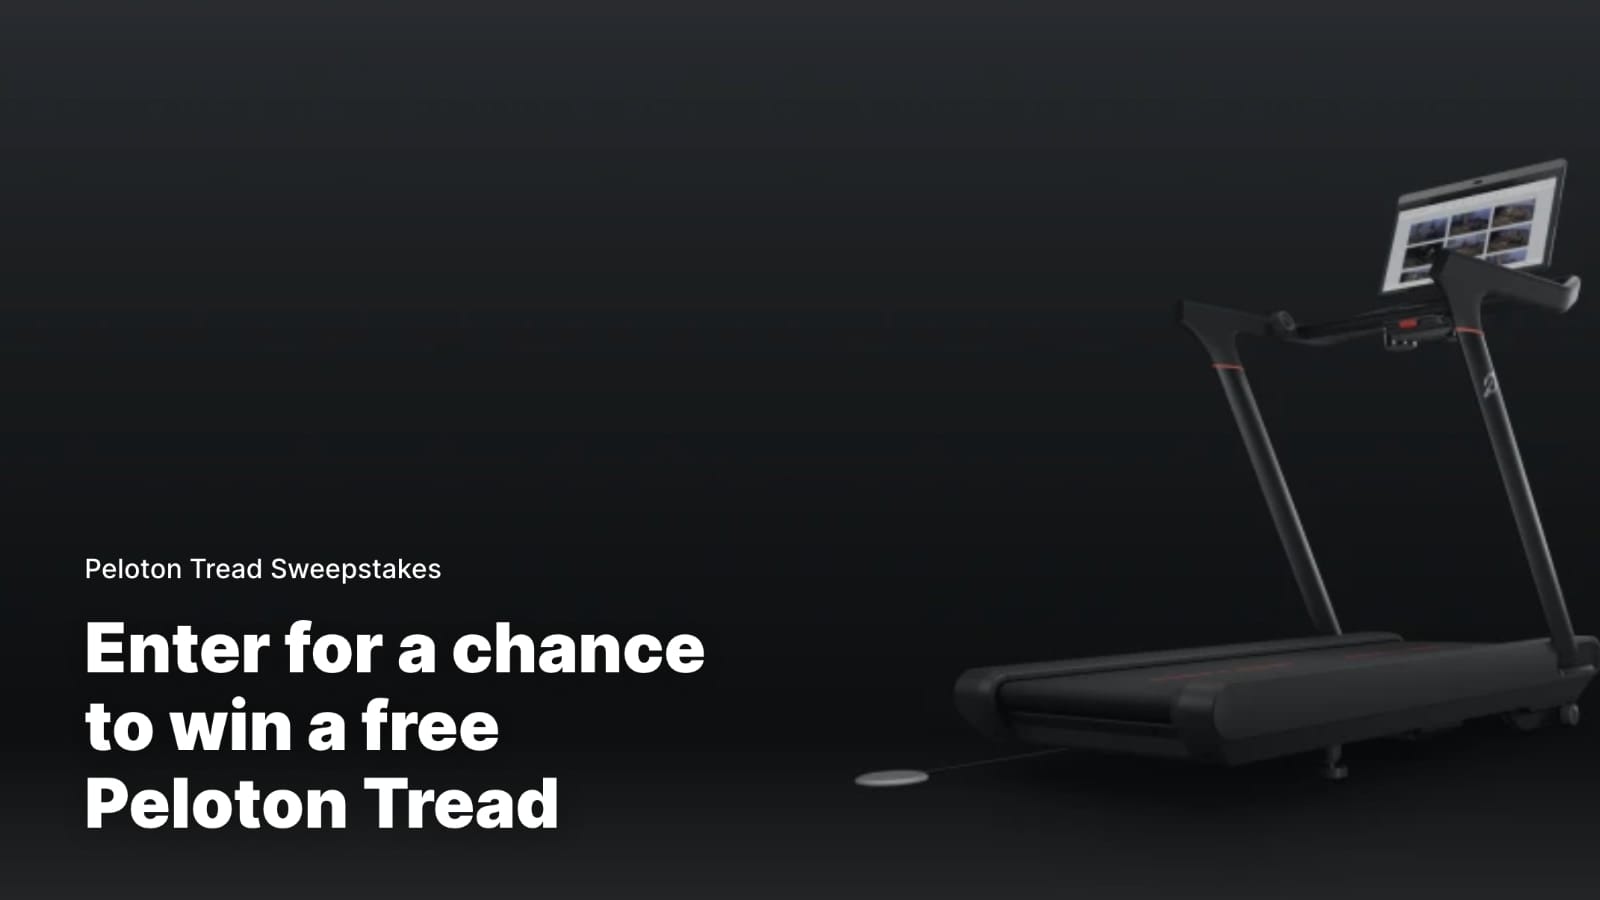 A free Peloton Tread is being given away.